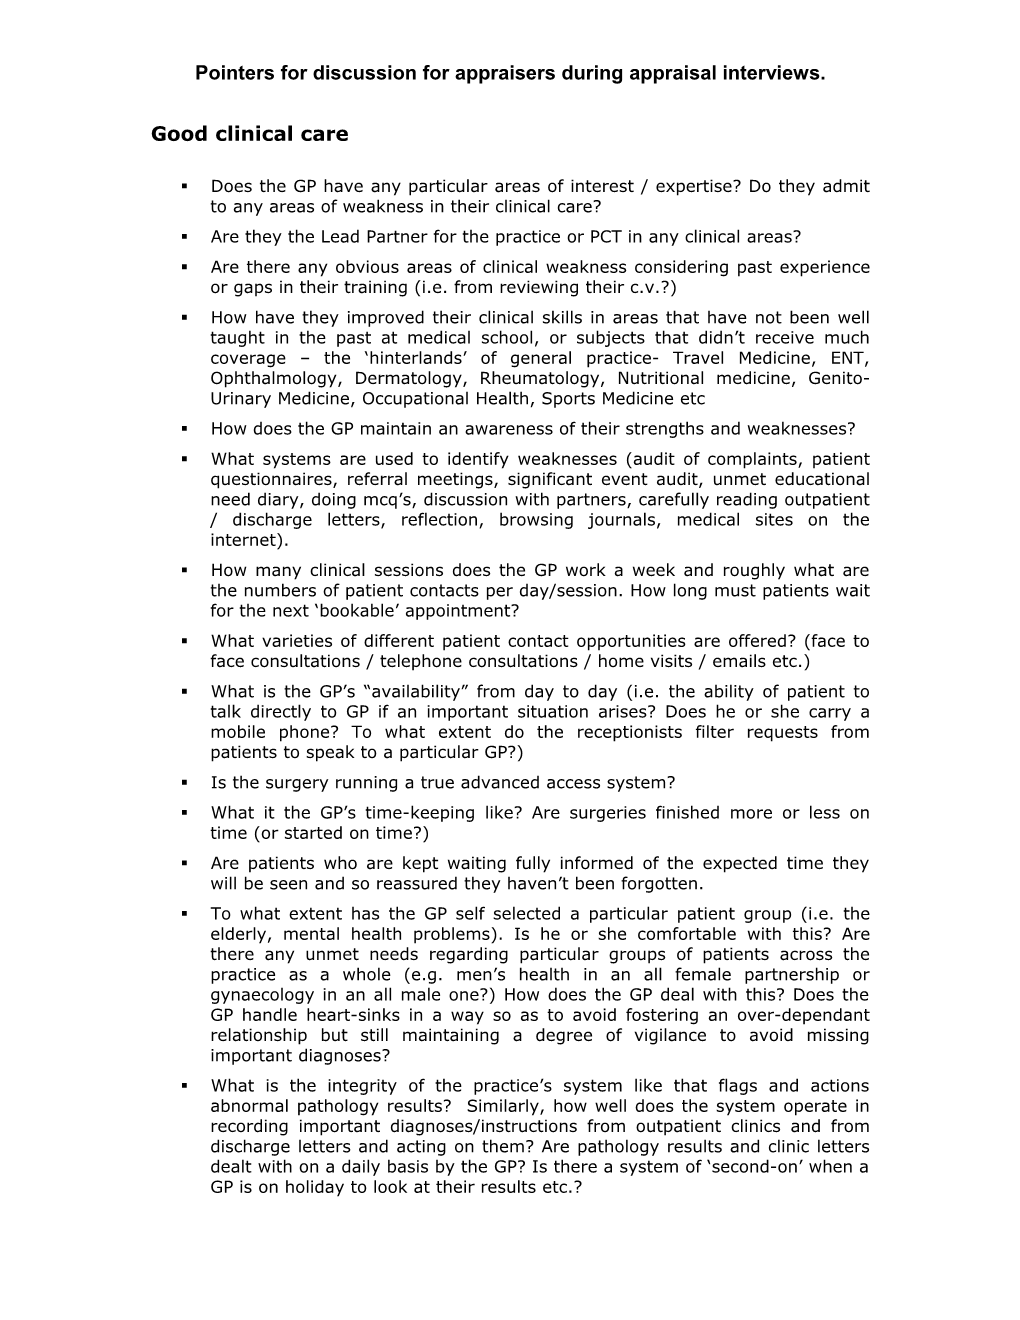 Form 4: Summary of Appraisal Discussion with Agreed Action and Personal Development Plan